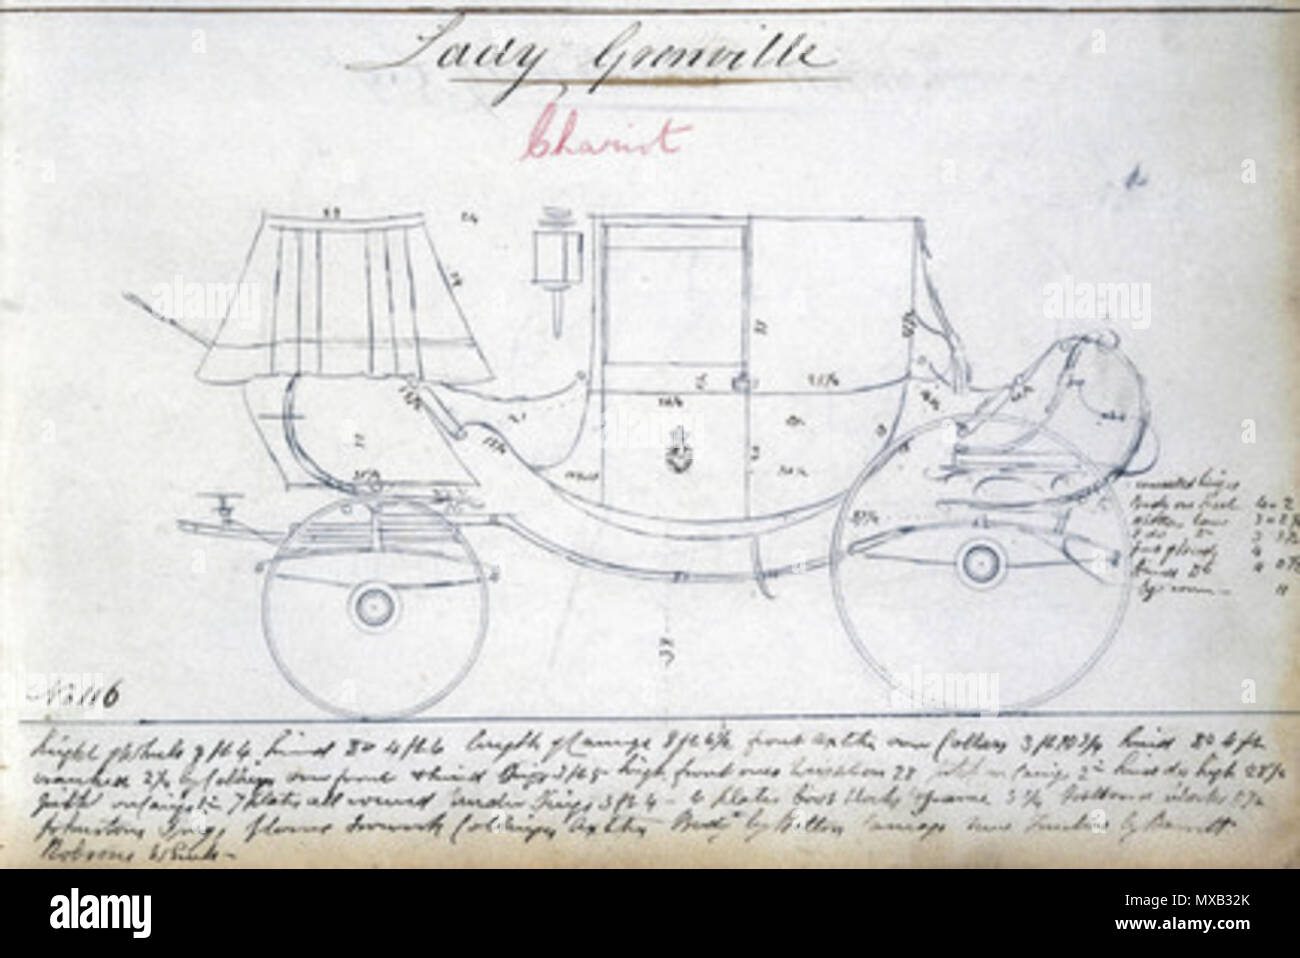 . Lady Grenville's chariot, c 1810-1873 Plate from 'Woodall's Coach Designs', produced between 1810 and 1873, showing a design for a four-wheeled carriage produced for Lady Greville. 'Woodall's Coach Designs' is a bound volume containing draughtsman's drawings for Woodall the coachmaker of London. 19th century. Unattributed 357 Lady Grenville's chariot, c 1810-1873 Stock Photo